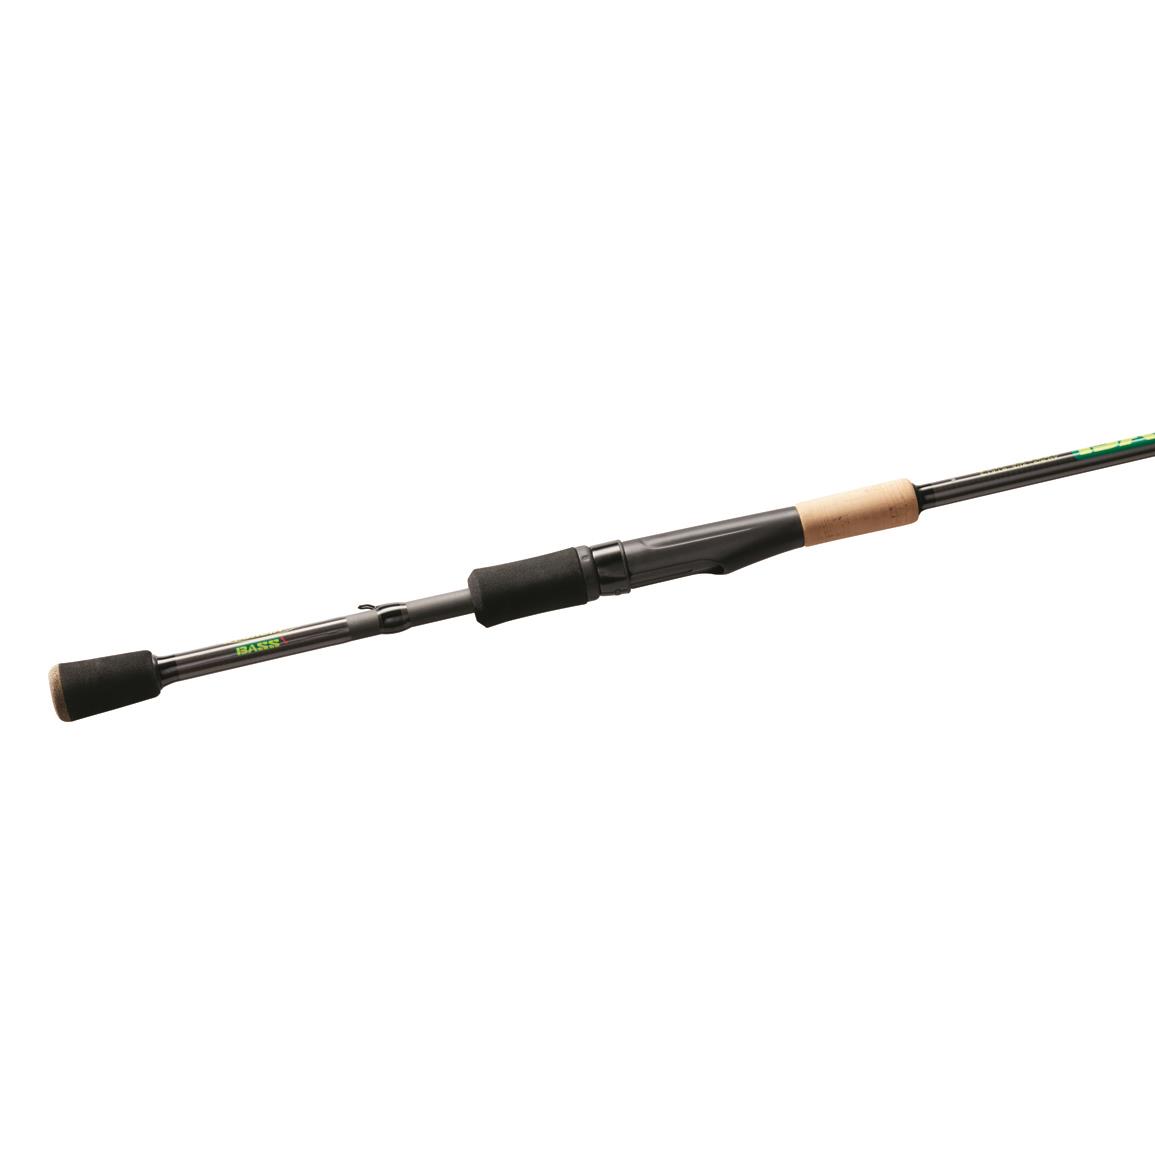 St. Croix Bass X Spinning Rod, 6'8" Length, Medium Power, Extra Fast Action